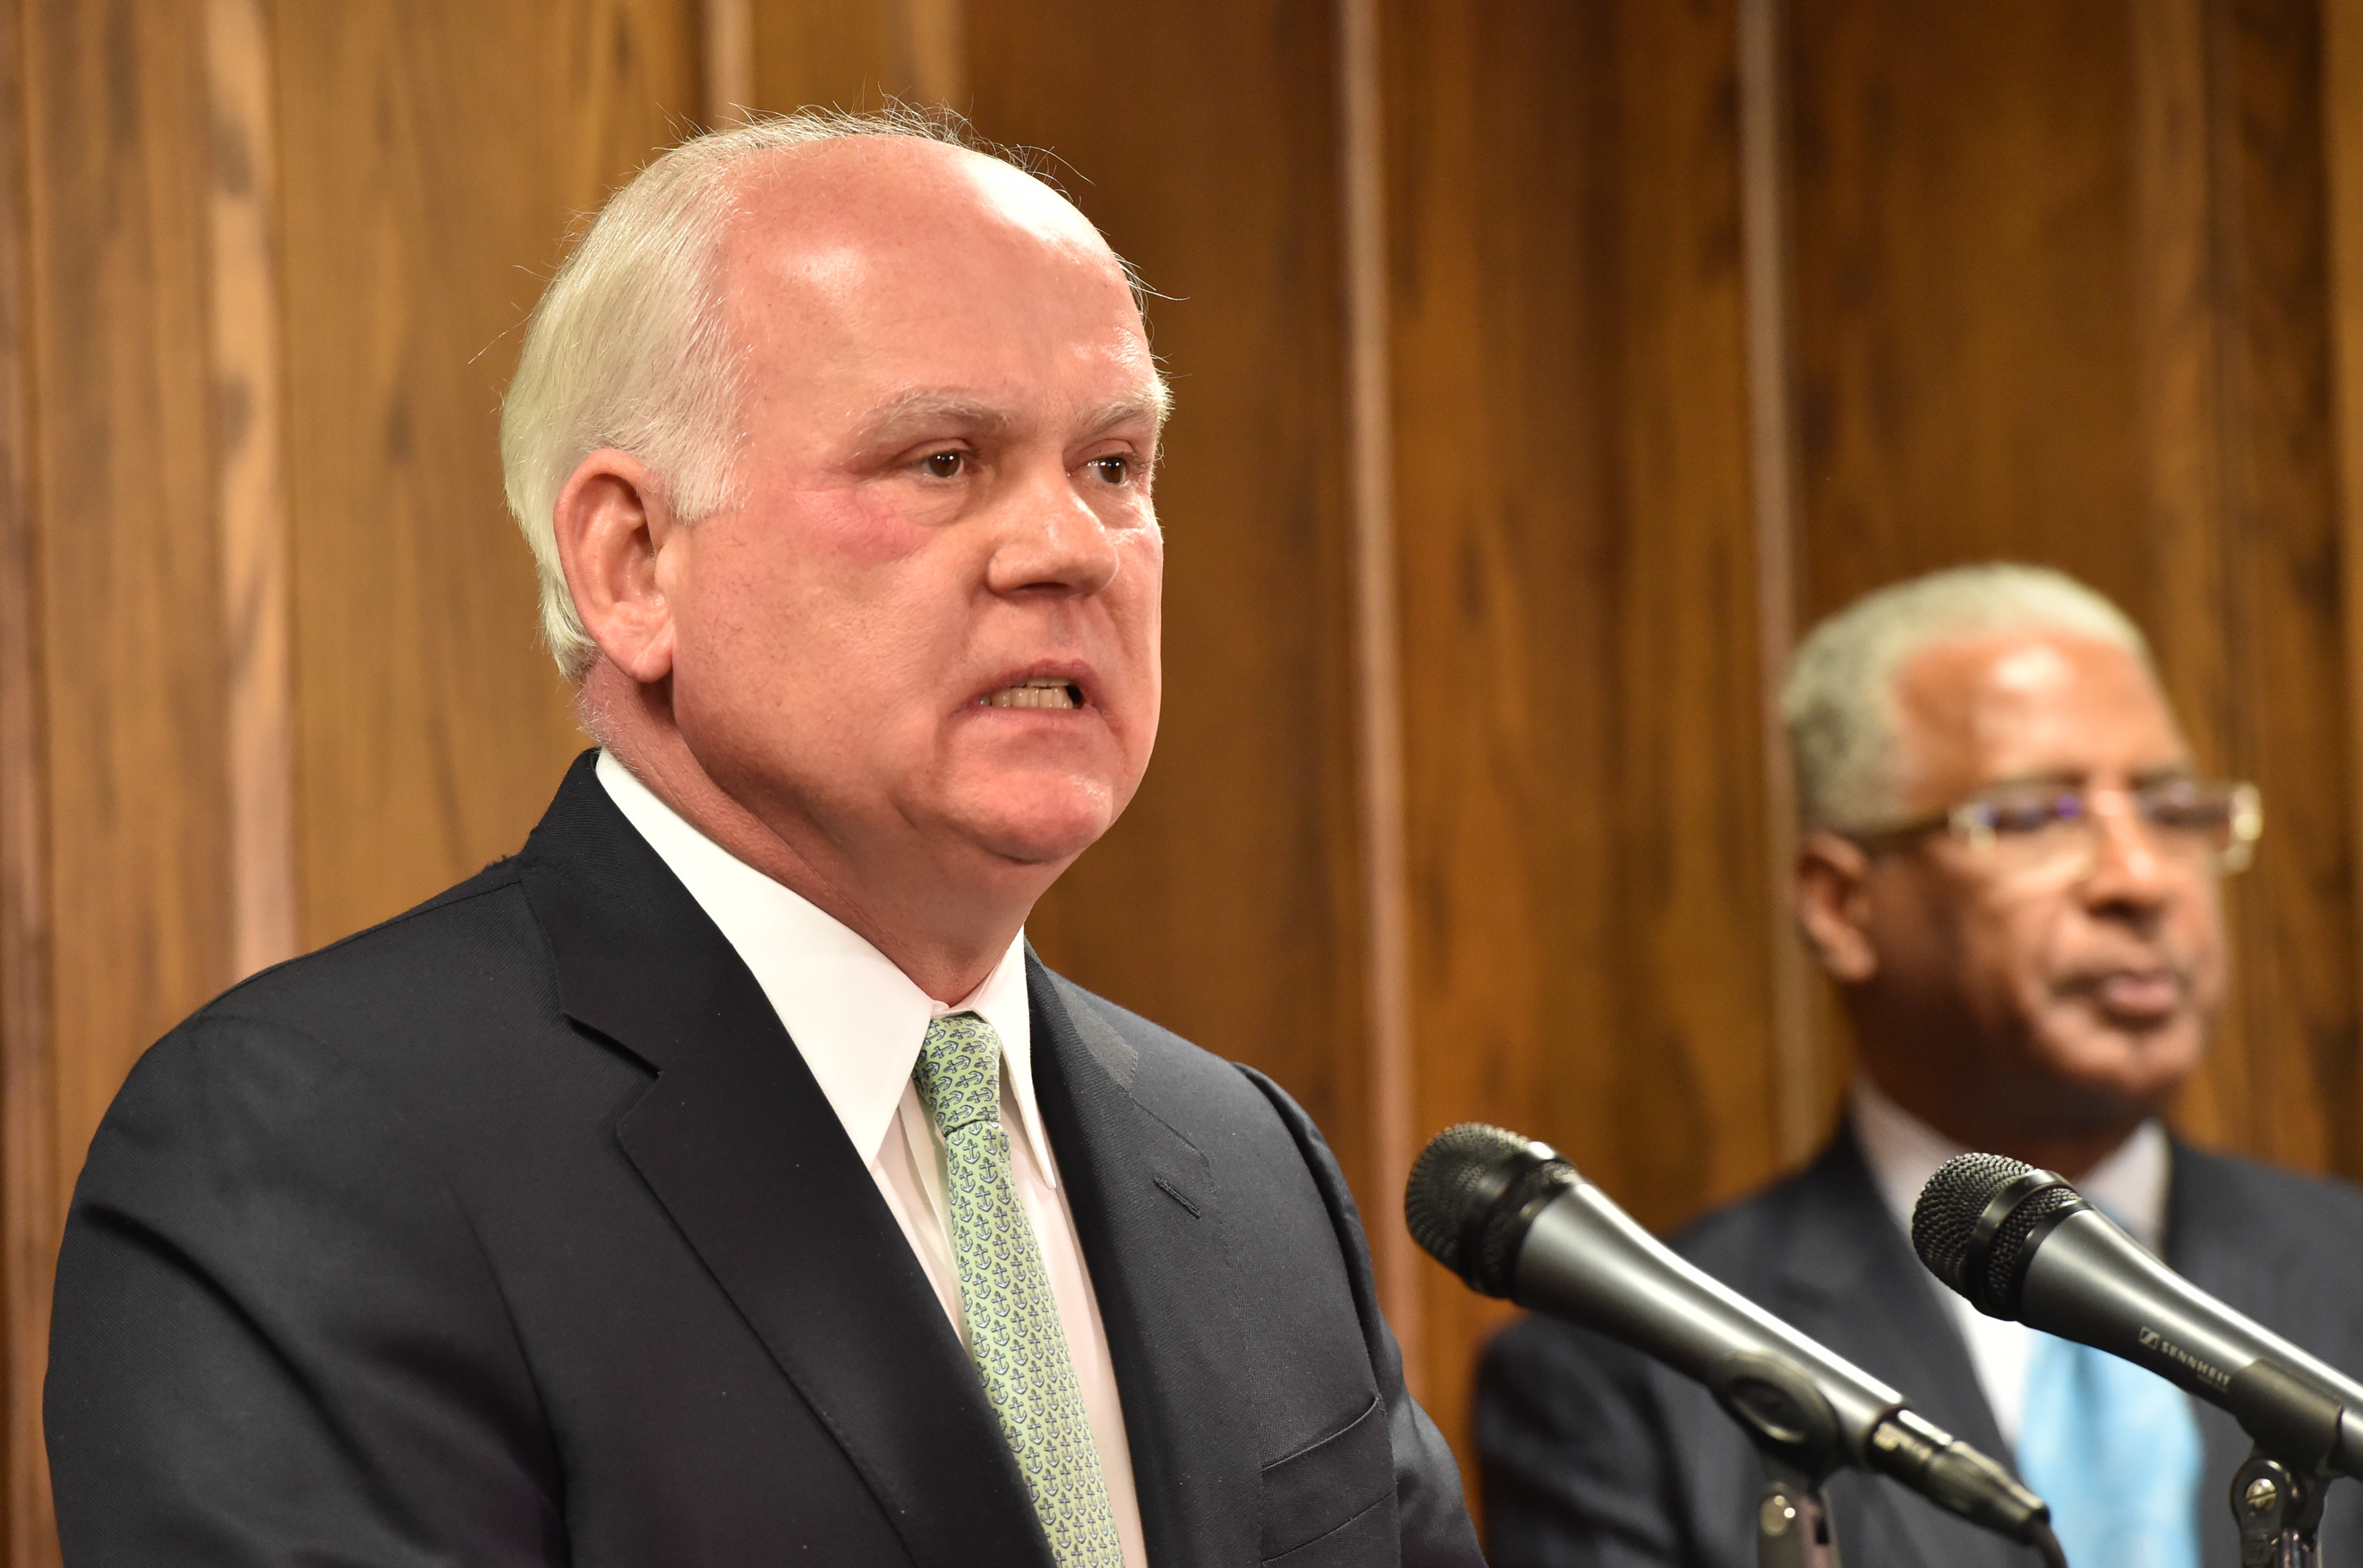 University of Alabama at Birmingham President Ray Watts holds a press conference Friday, Jan. 9, 2015. (AP Photo/AL.com, Frank Couch )